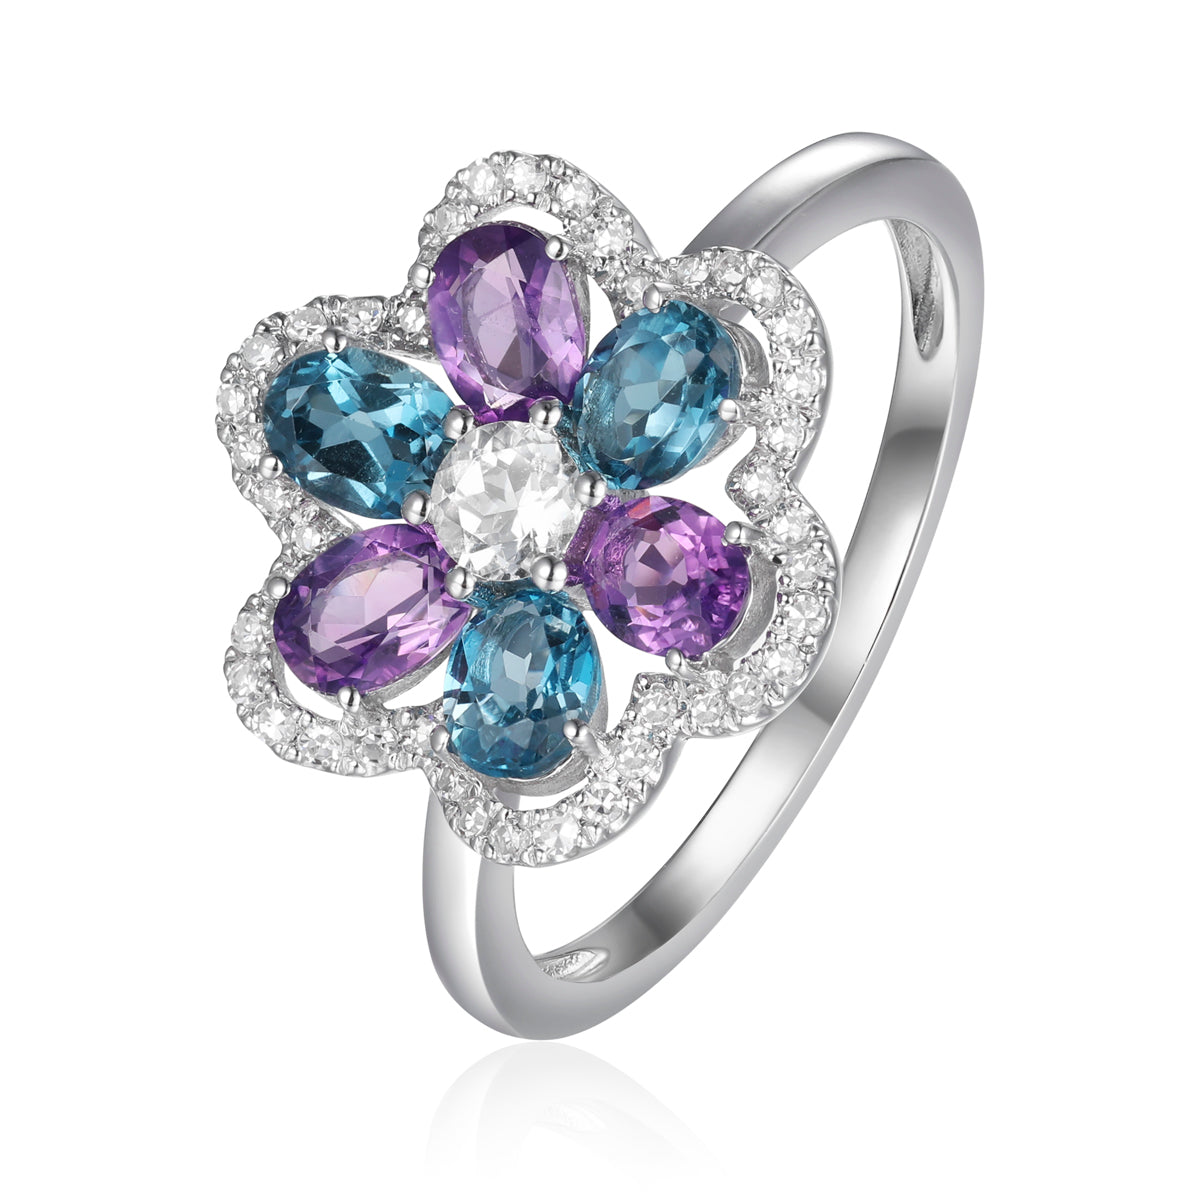 Luvente Amethyst, London Blue Topaz, and Diamond Flower Ring - Colored Stone Rings - Women's